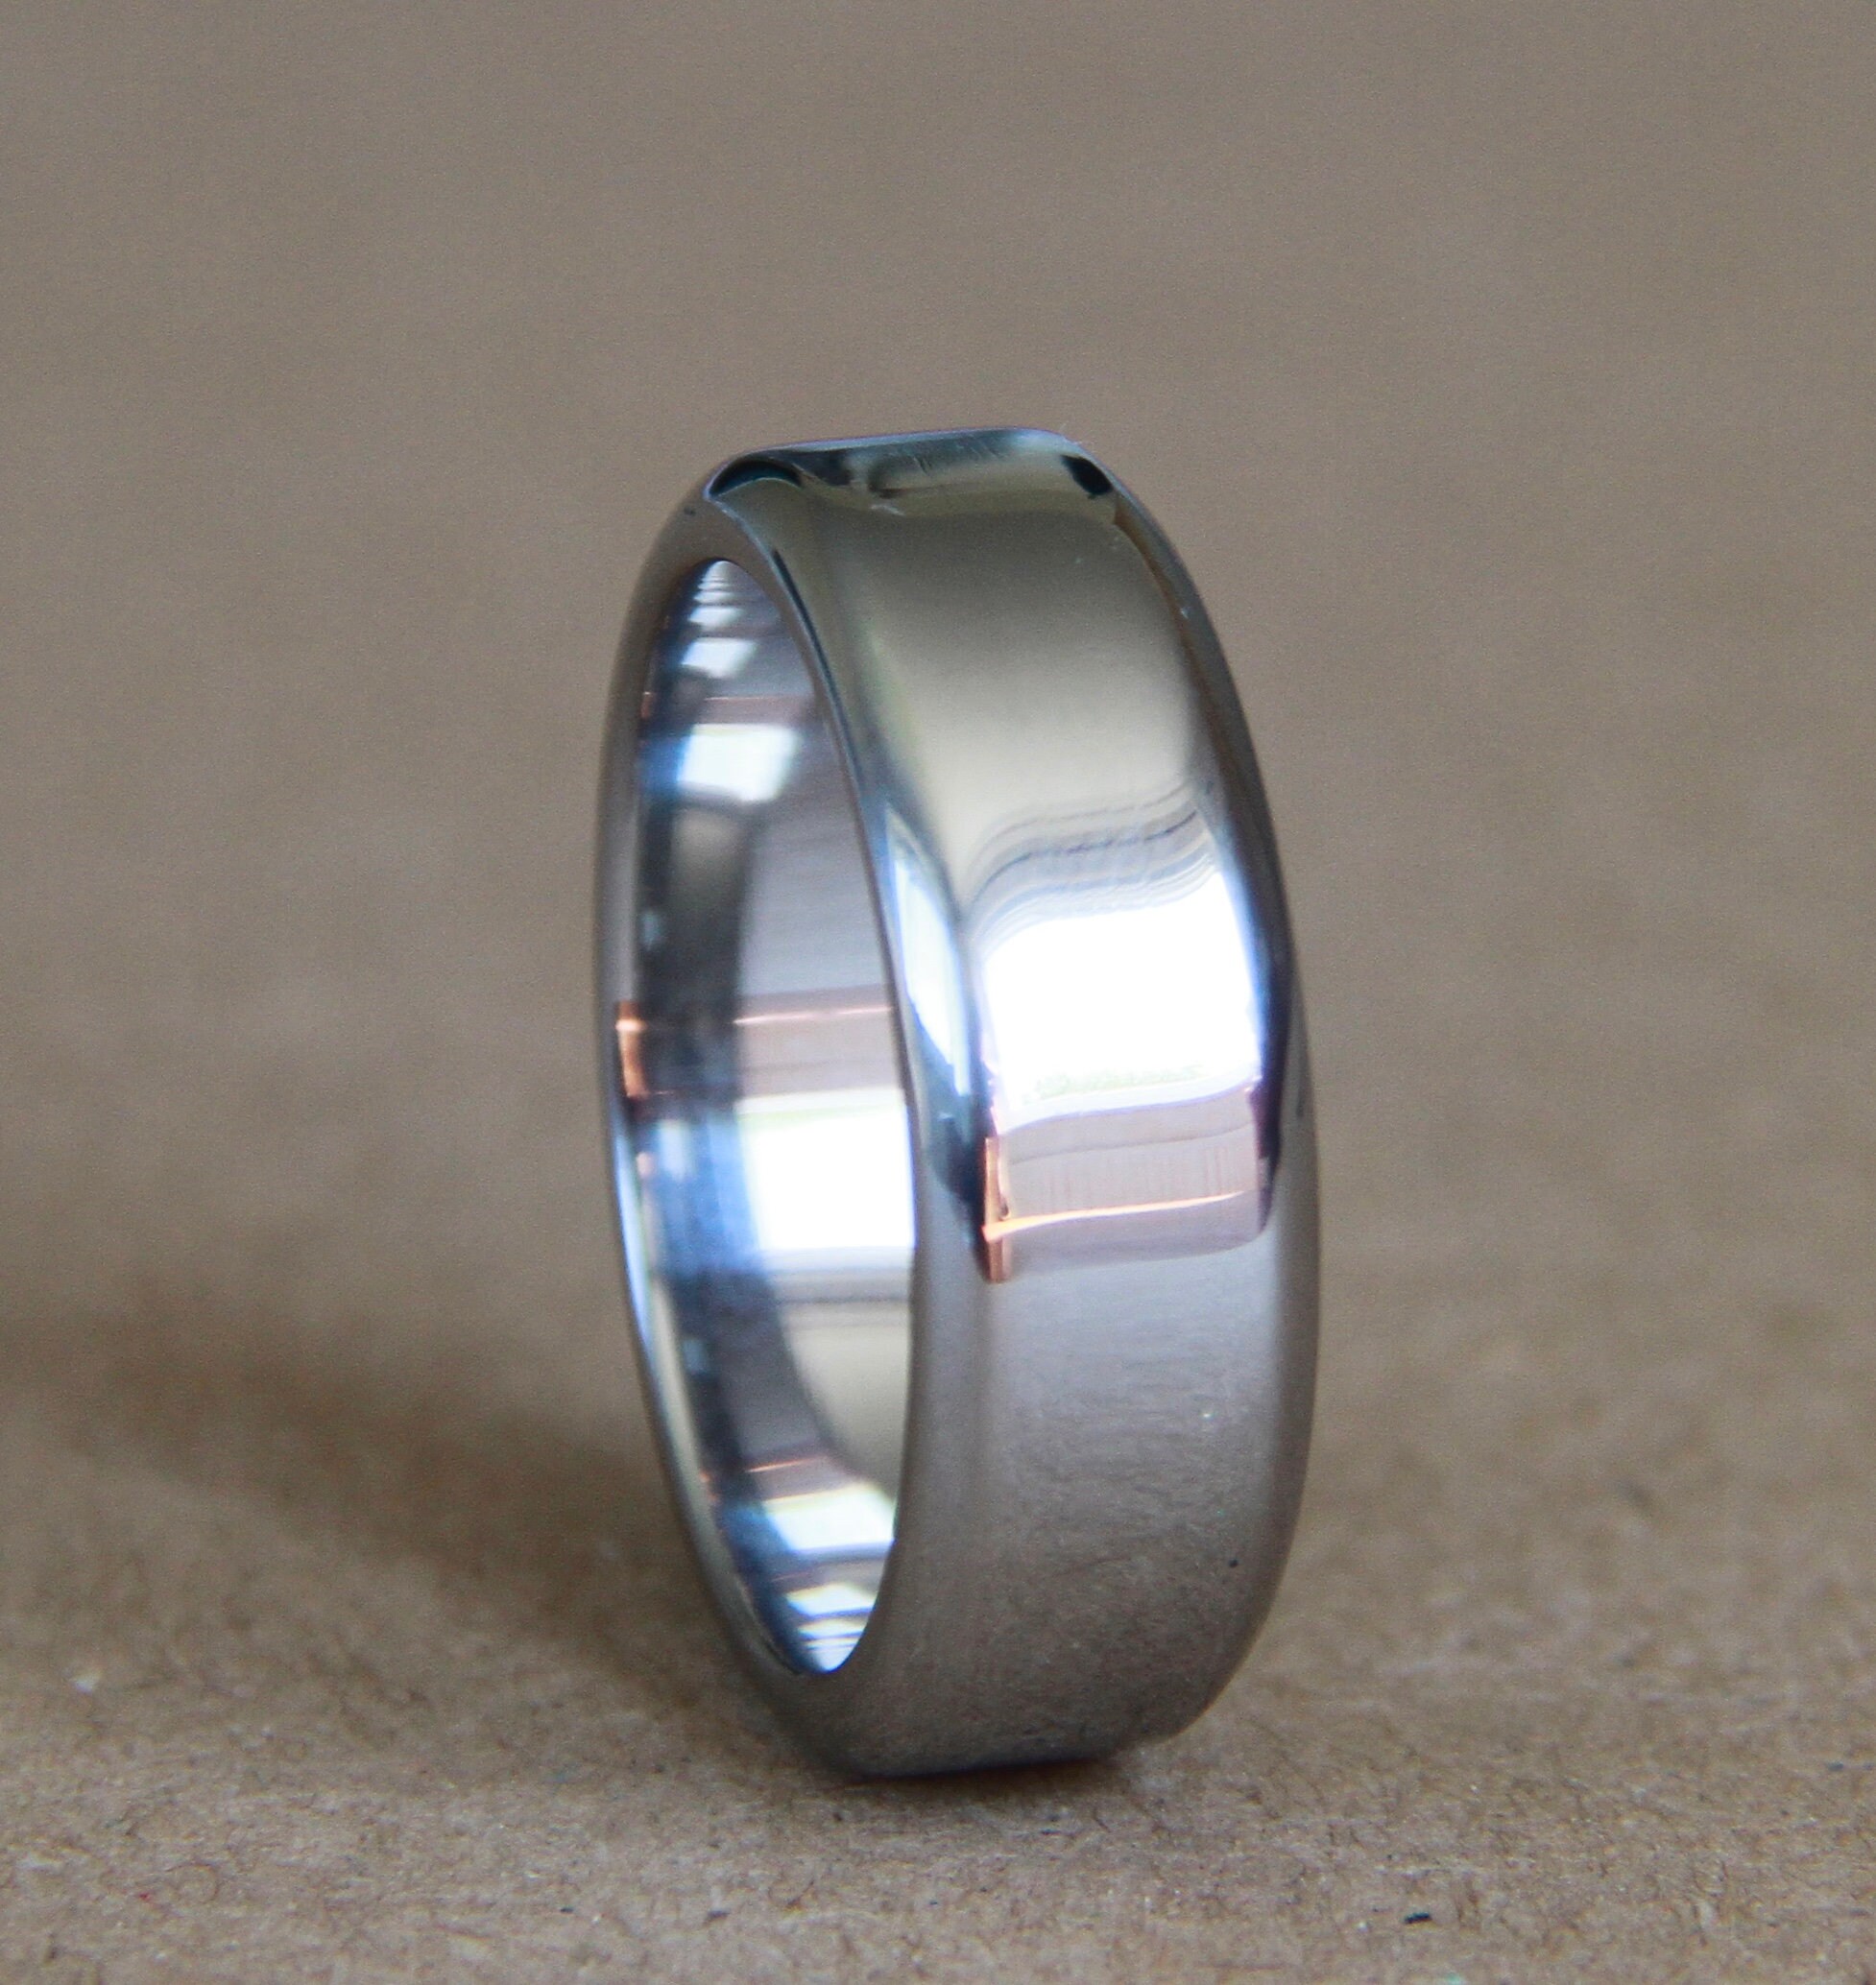 Stainless Steel Ring, 8mm Minimalist Ring, Man Ring, Rings for